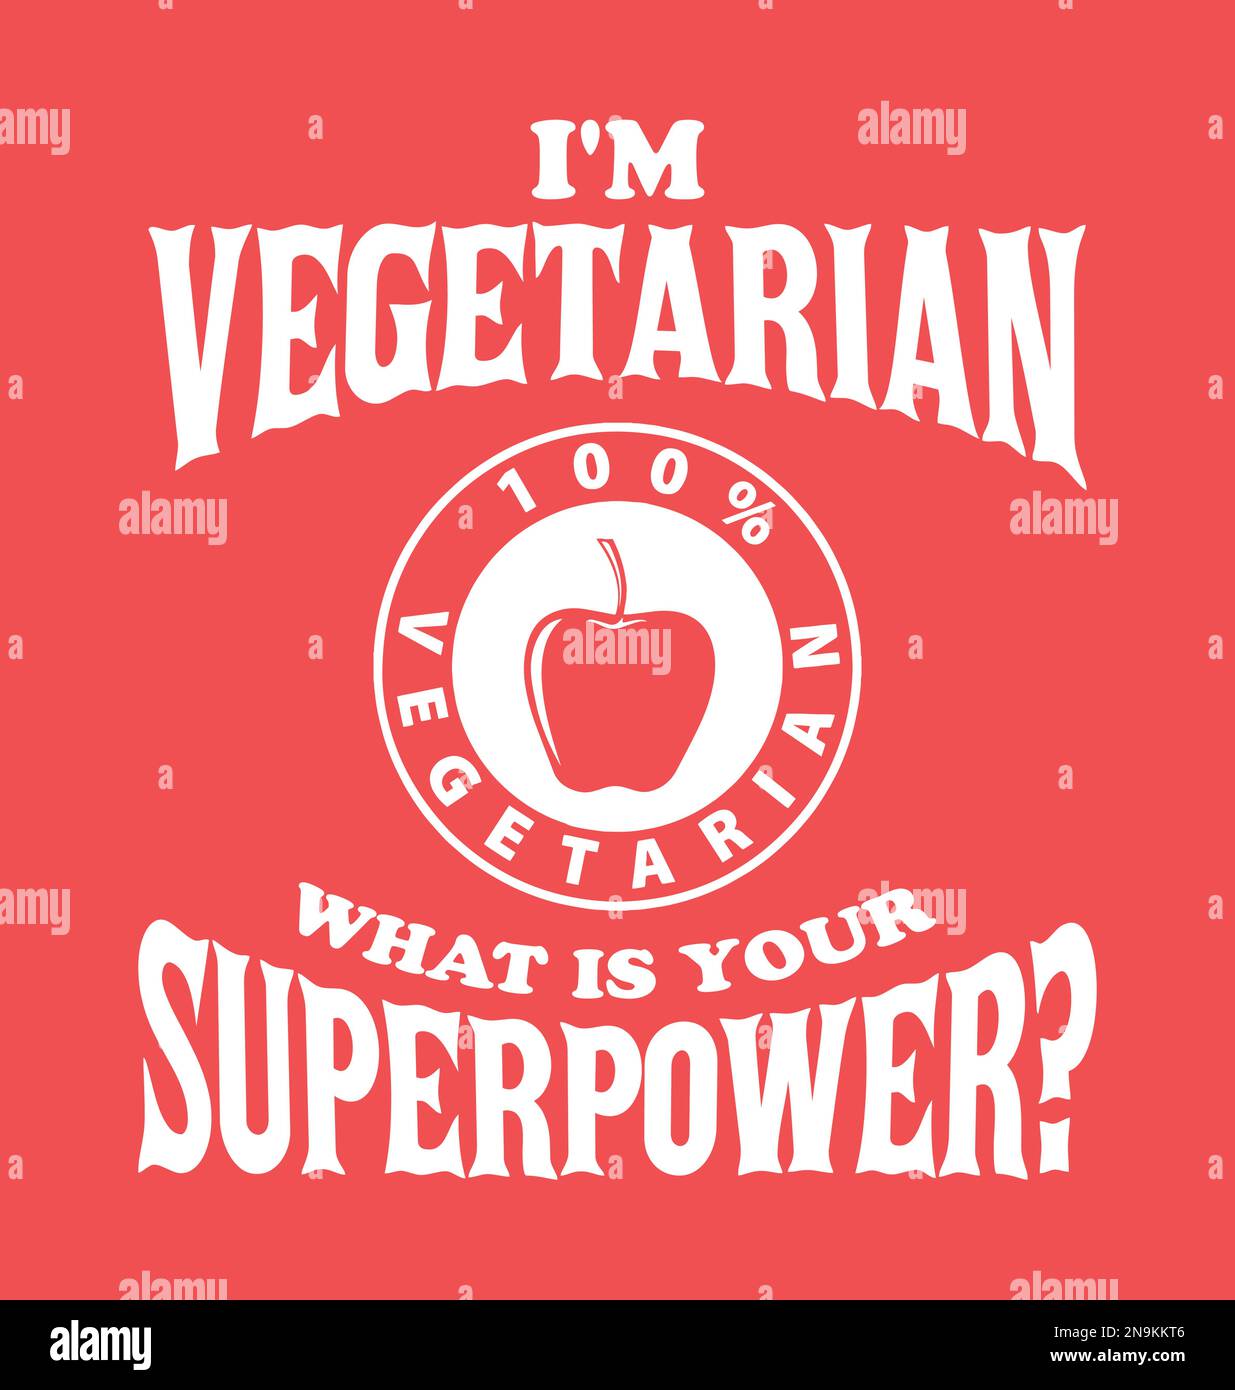 I'm vegetarian, what is your superpower. Vegetarian lifestyle. Stock Vector